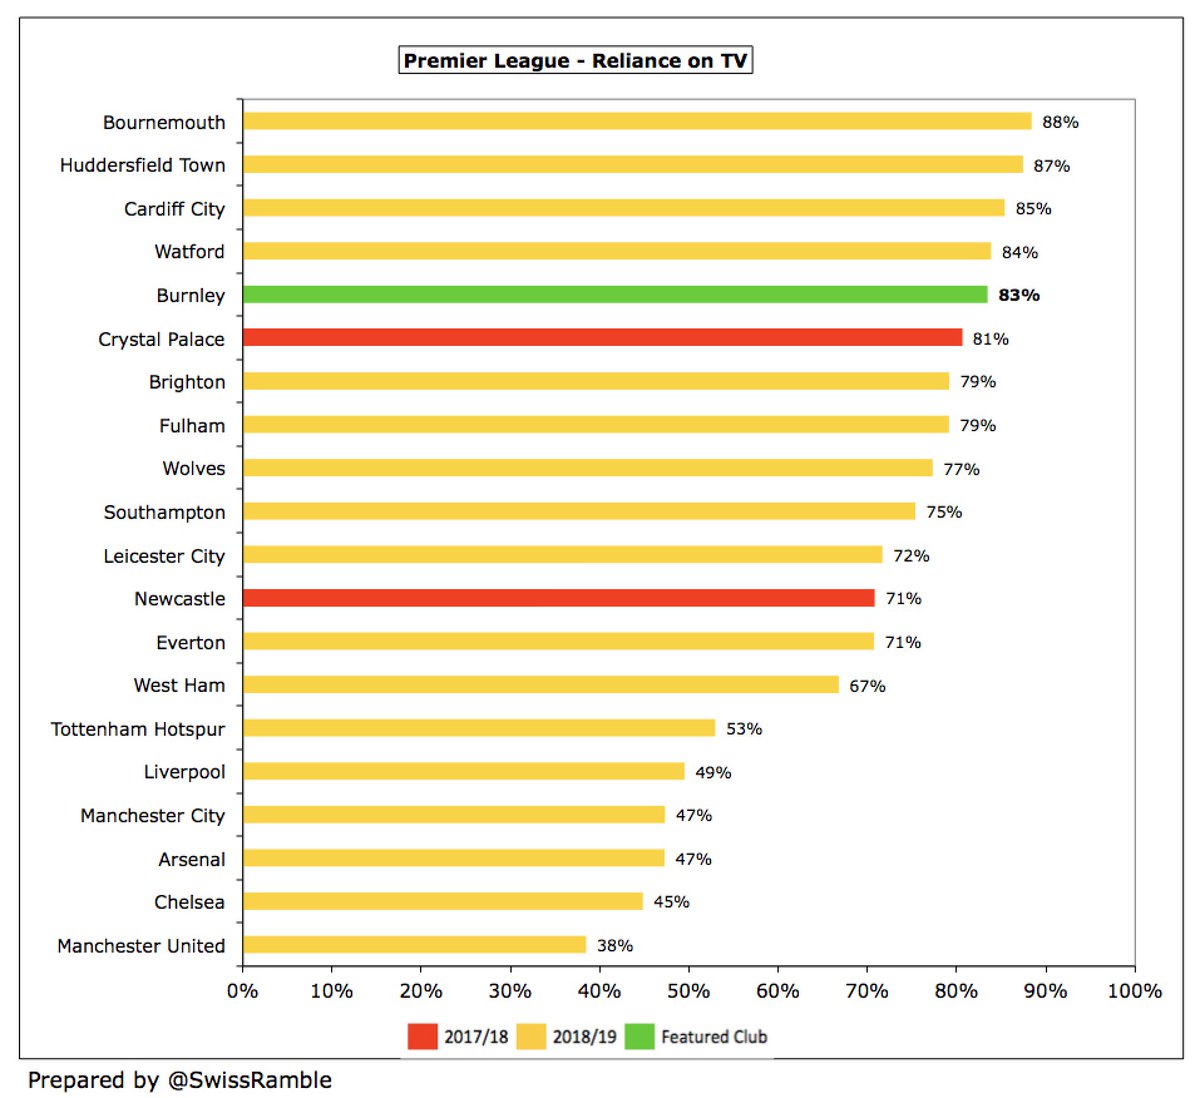 A massive 83% of  #BurnleyFC revenue came from TV (£115m out of £138m), though this is “only” the 5th highest reliance on broadcasting in the Premier League. Furthermore, it should be noted that no fewer than 13 of the 20 clubs in the top flight are above 70%.